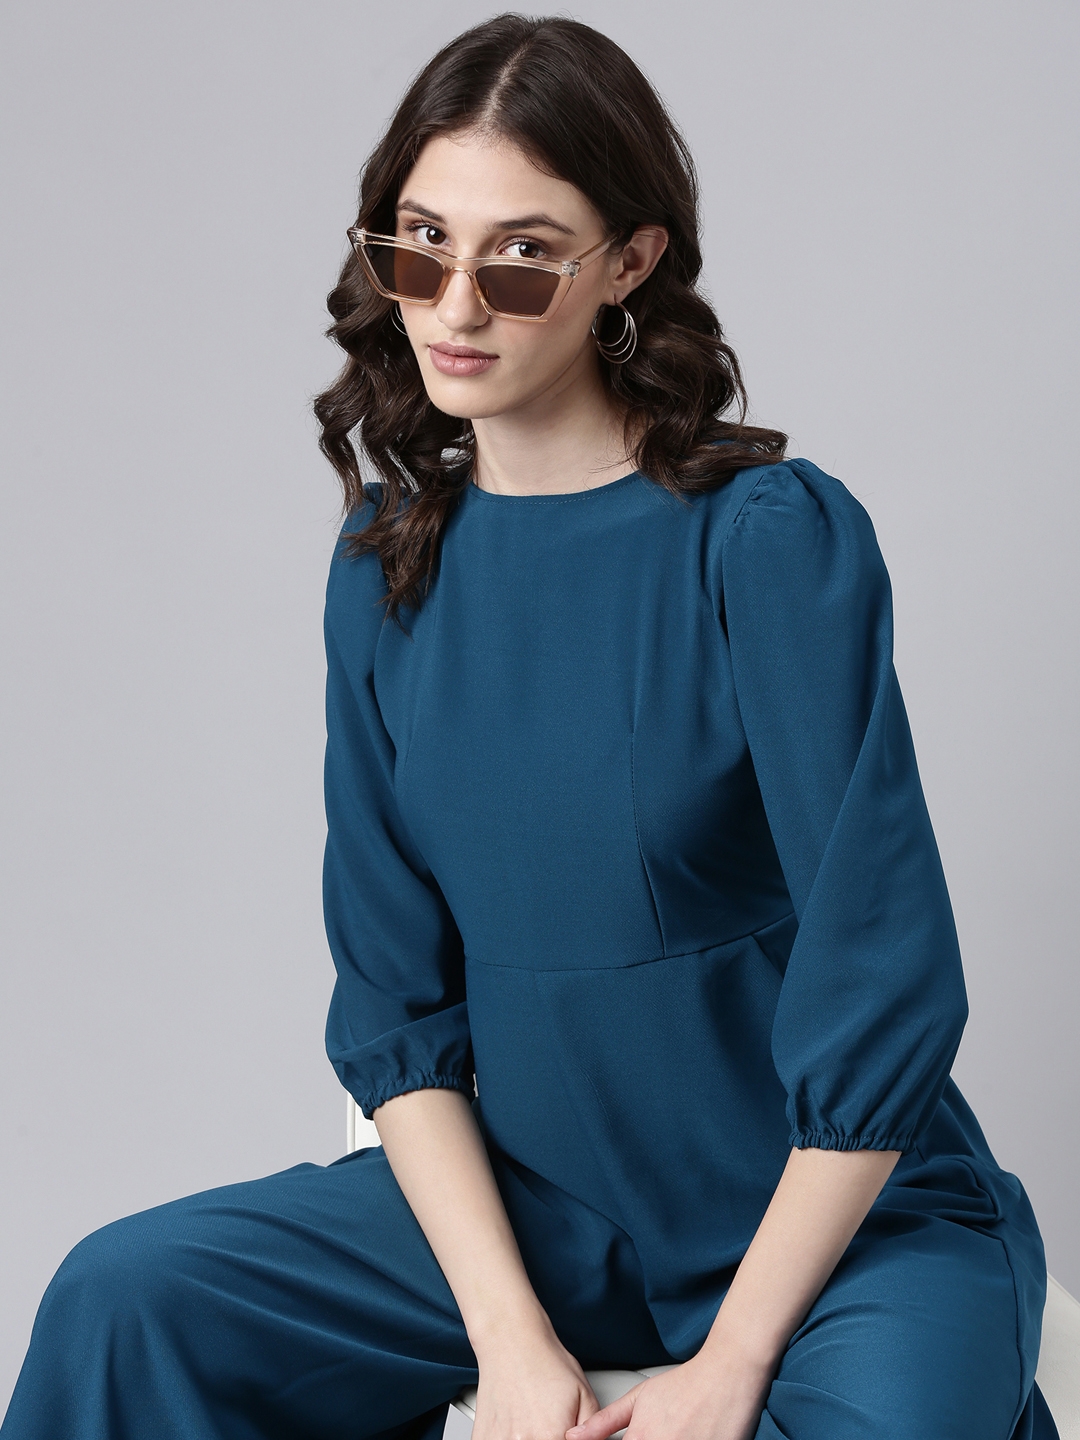 SHOWOFF Women's Round Neck Three-Quarter Sleeves Teal Solid Basic Jumpsuit